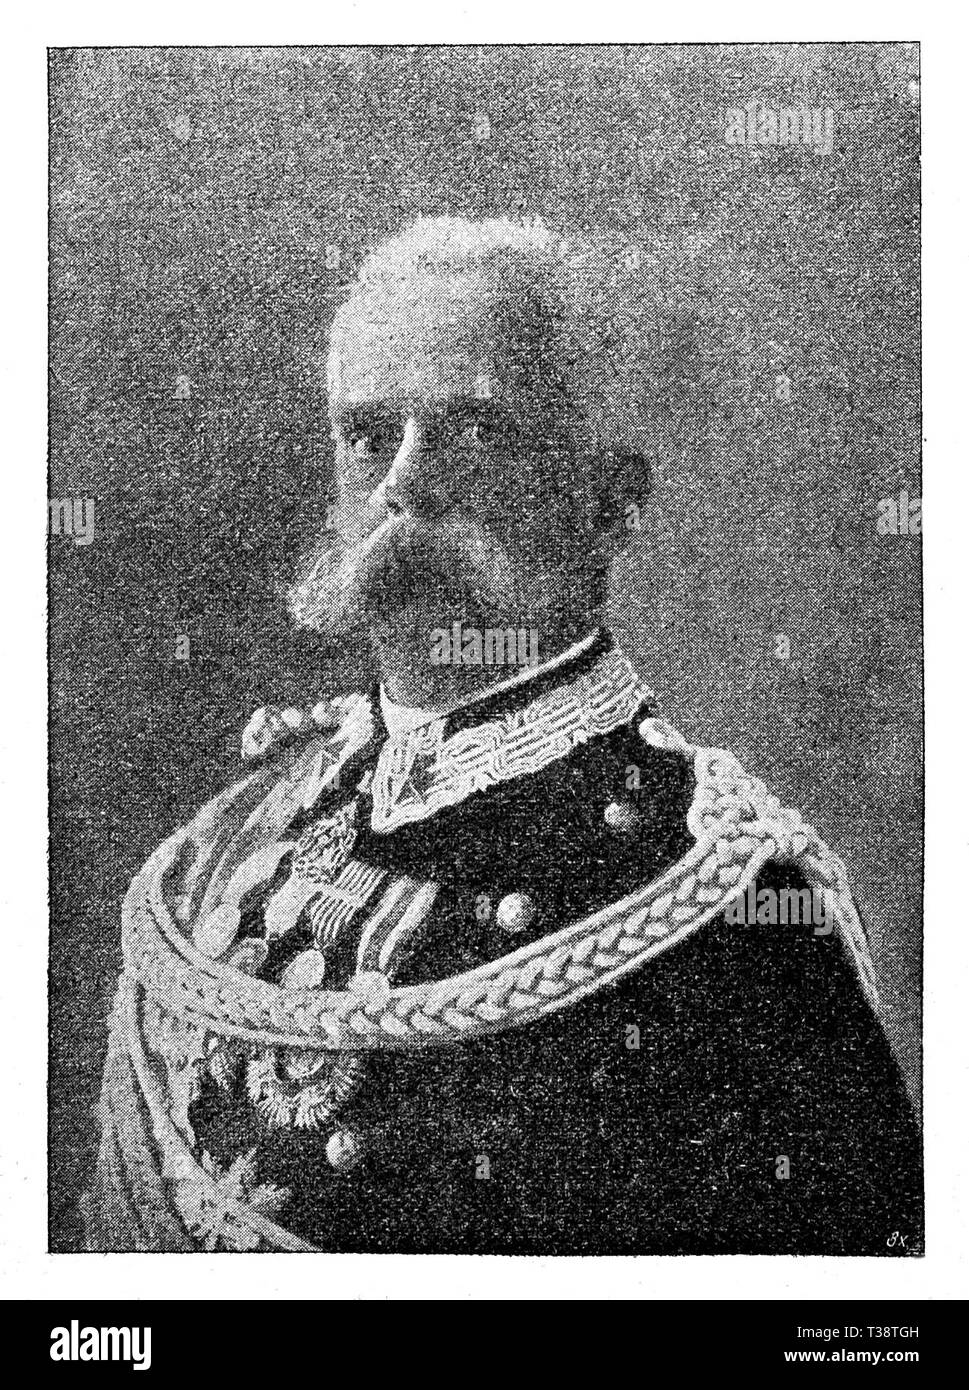 Umberto I of Italy. Digital improved reproduction from Illustrated overview of the life of mankind in the 19th century, 1901 edition, Marx publishing house, St. Petersburg. Stock Photo